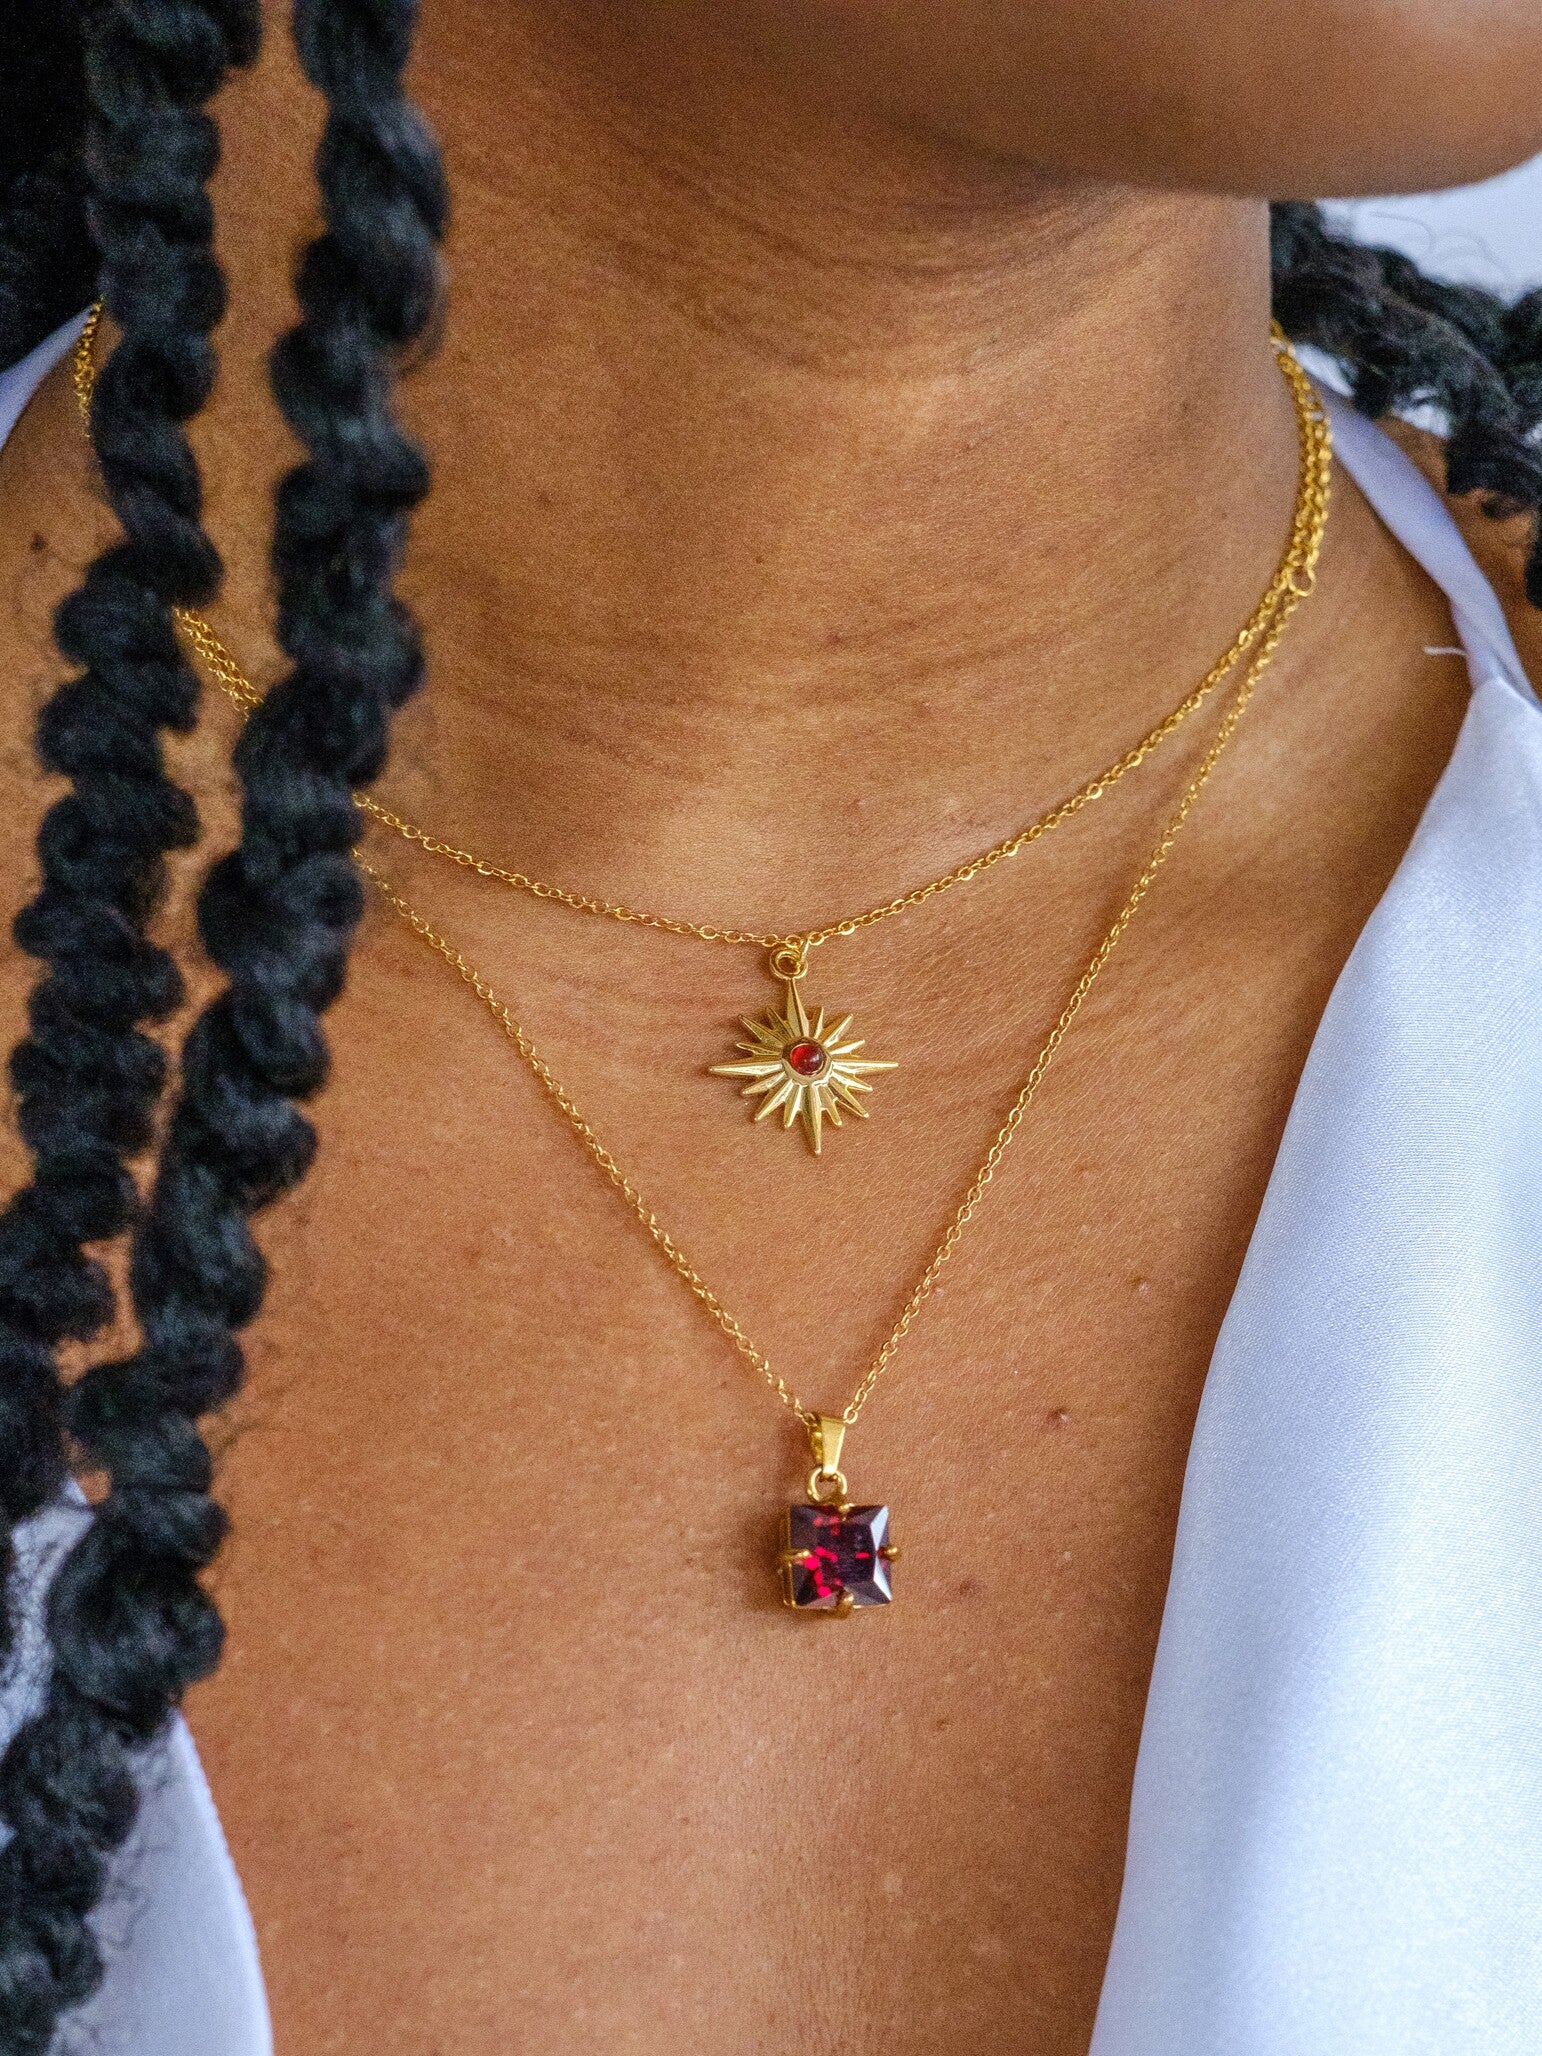 Woman wearing two gold necklaces, one short necklace with a star shaped pendant and a red central gem. The second longer necklace has a red square crystal pendant